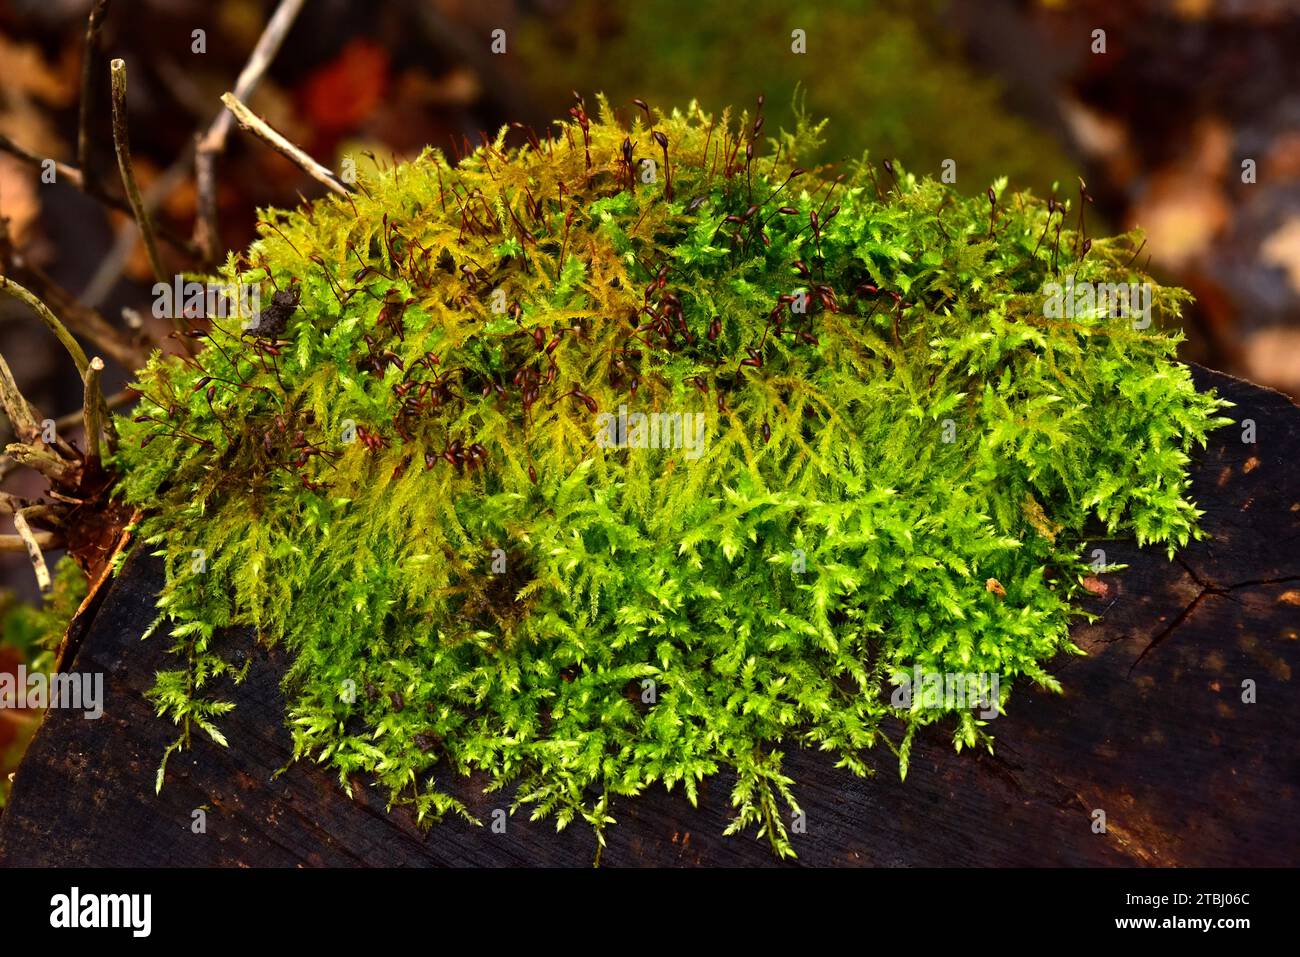 Cypress-leaved plaitmoss (Hypnum cupressiforme) is a cosmopolitan moss. This photo was taken in Dalby National Park, Sweden. Stock Photo